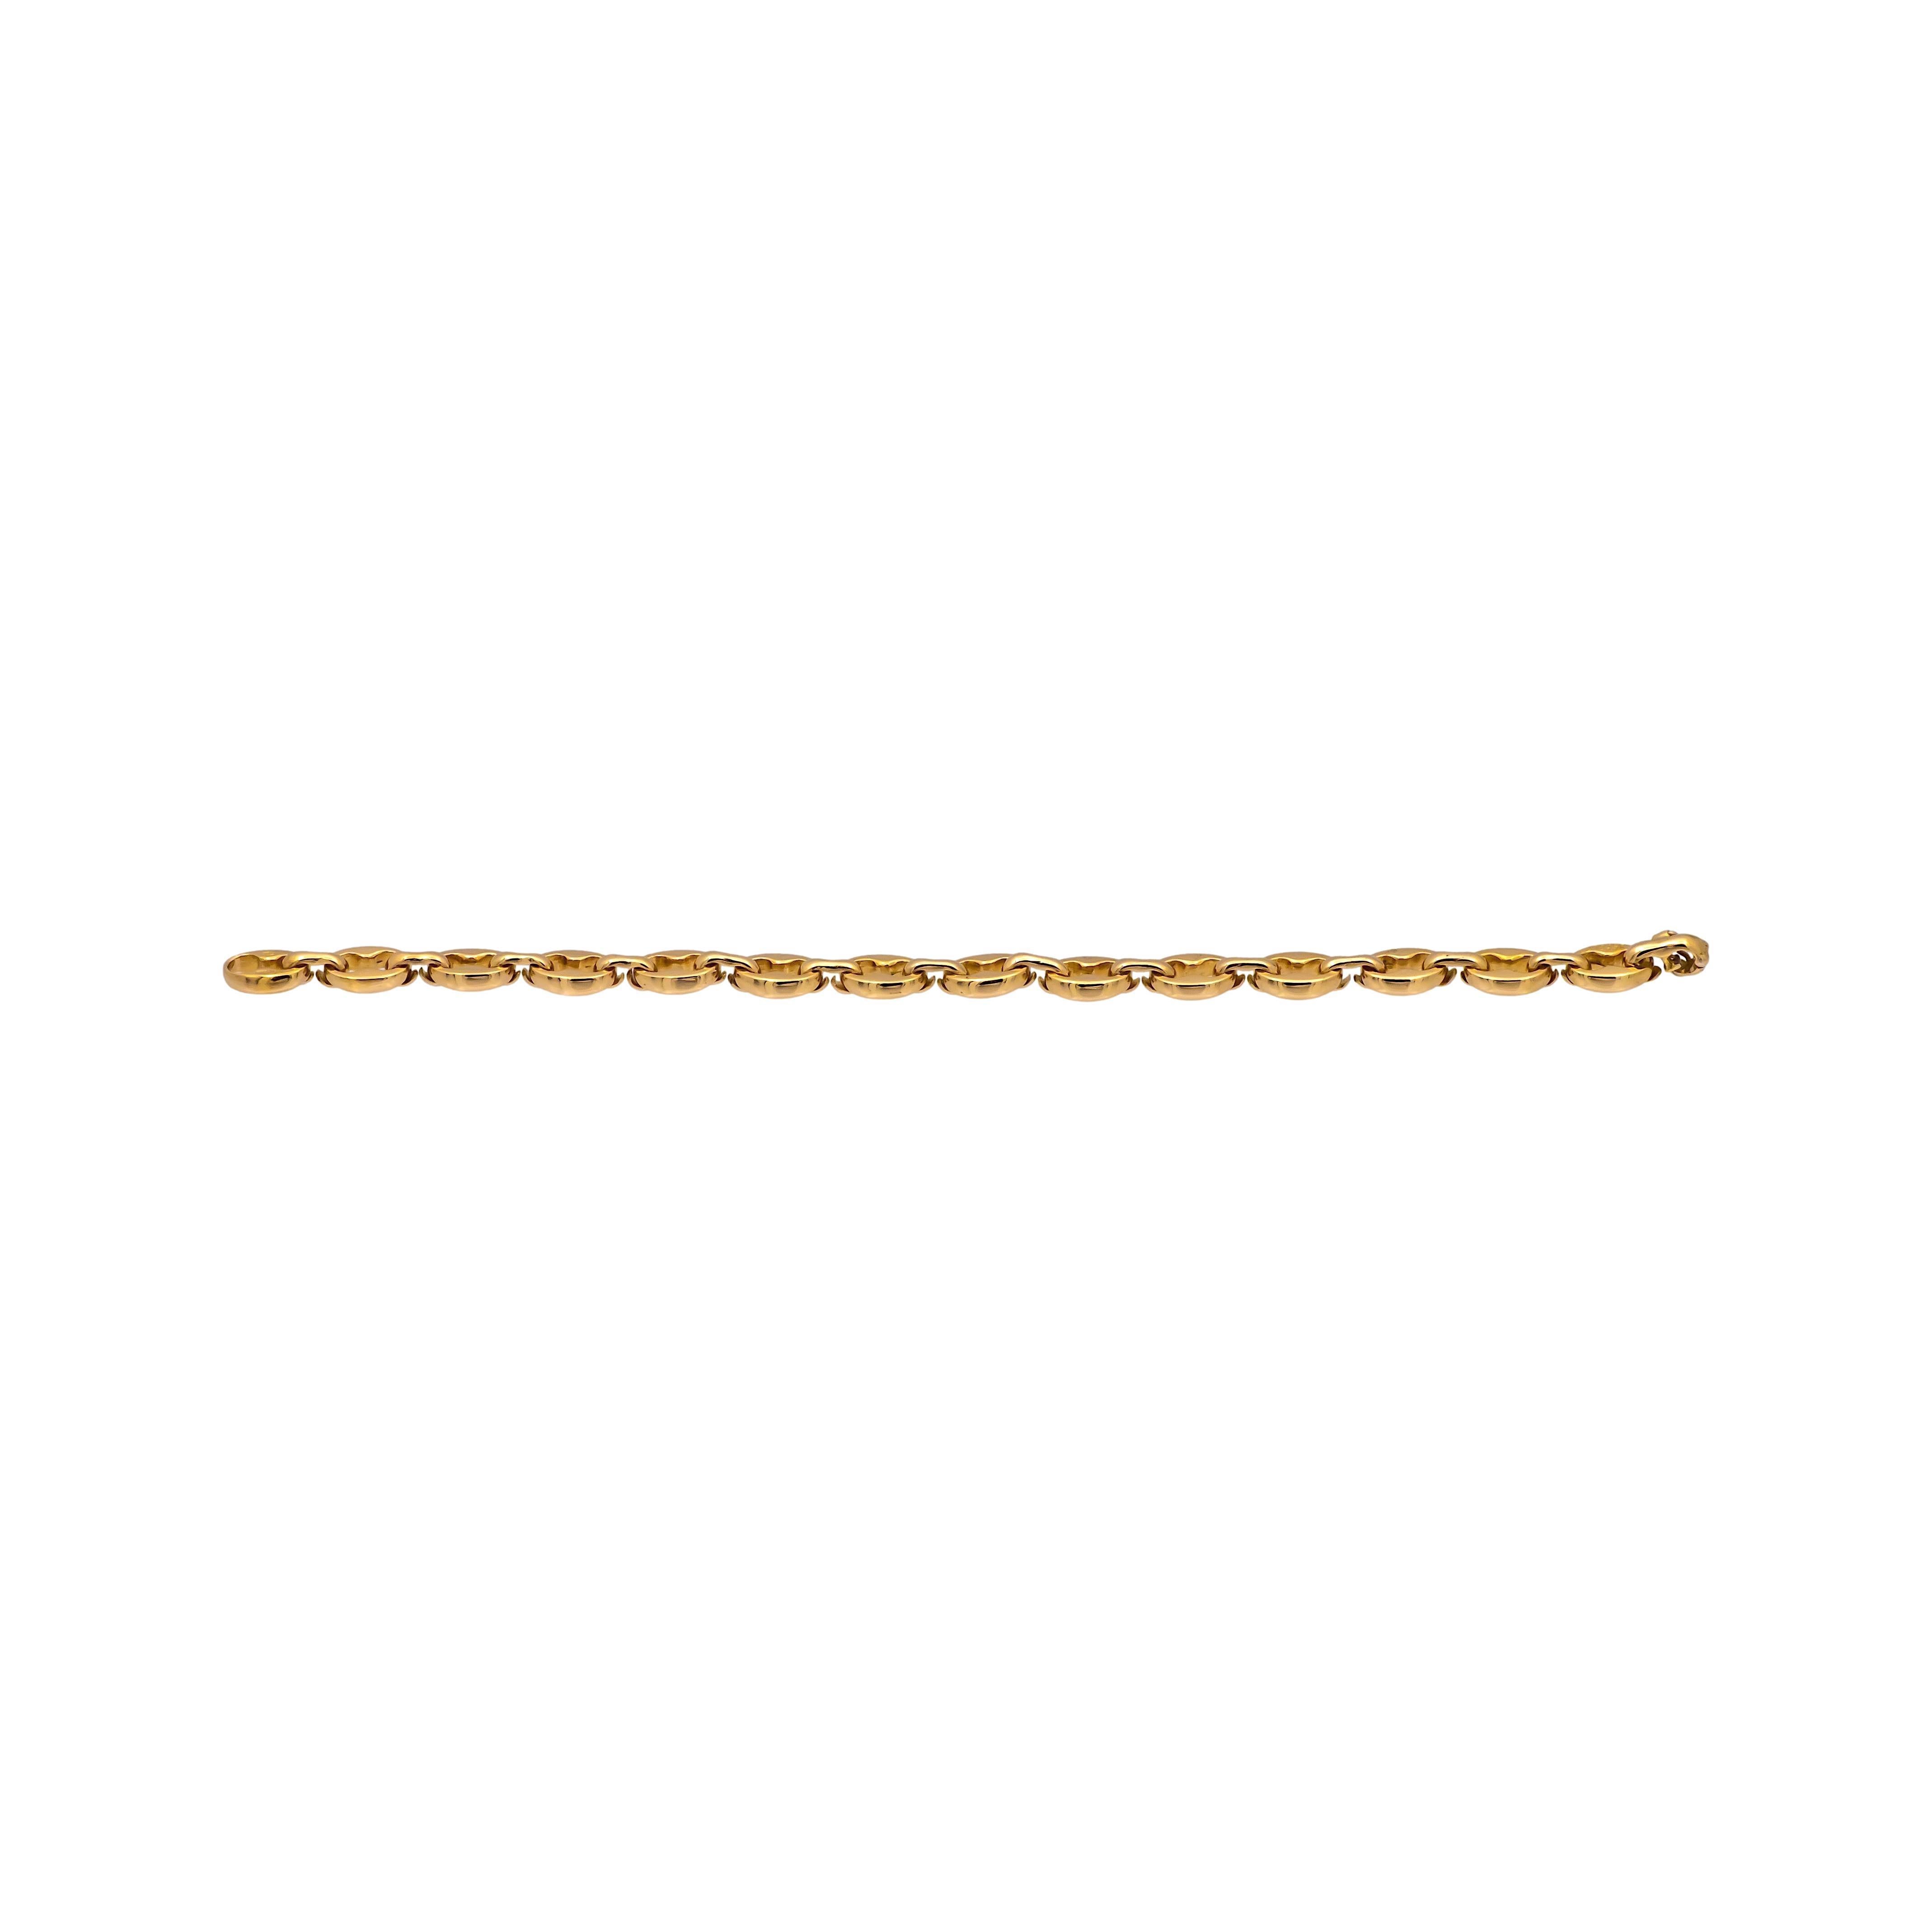 Vintage Cartier bracelet finely crafted in 18 karat yellow gold featuring open interlocking claws and bean link. The bracelet measures 7